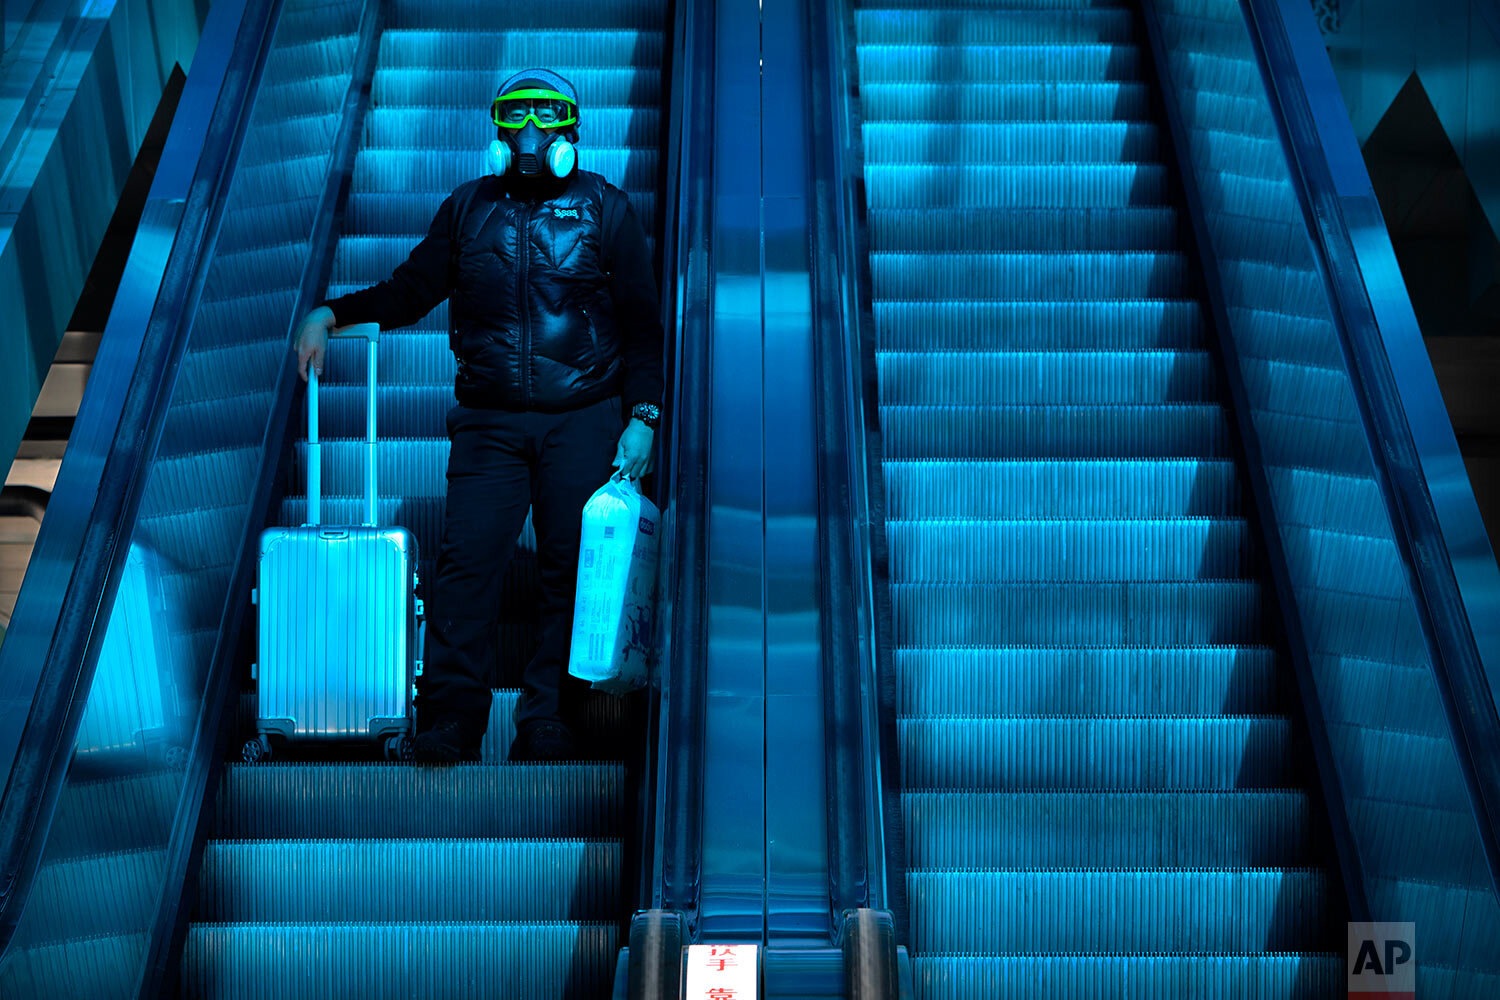  A traveler wearing a mask to protect against the spread of the coronavirus rides an escalator beneath a colored skylight at the Beijing Railway Station in Beijing, Thursday, Jan. 28, 2021.  (AP Photo/Mark Schiefelbein) 